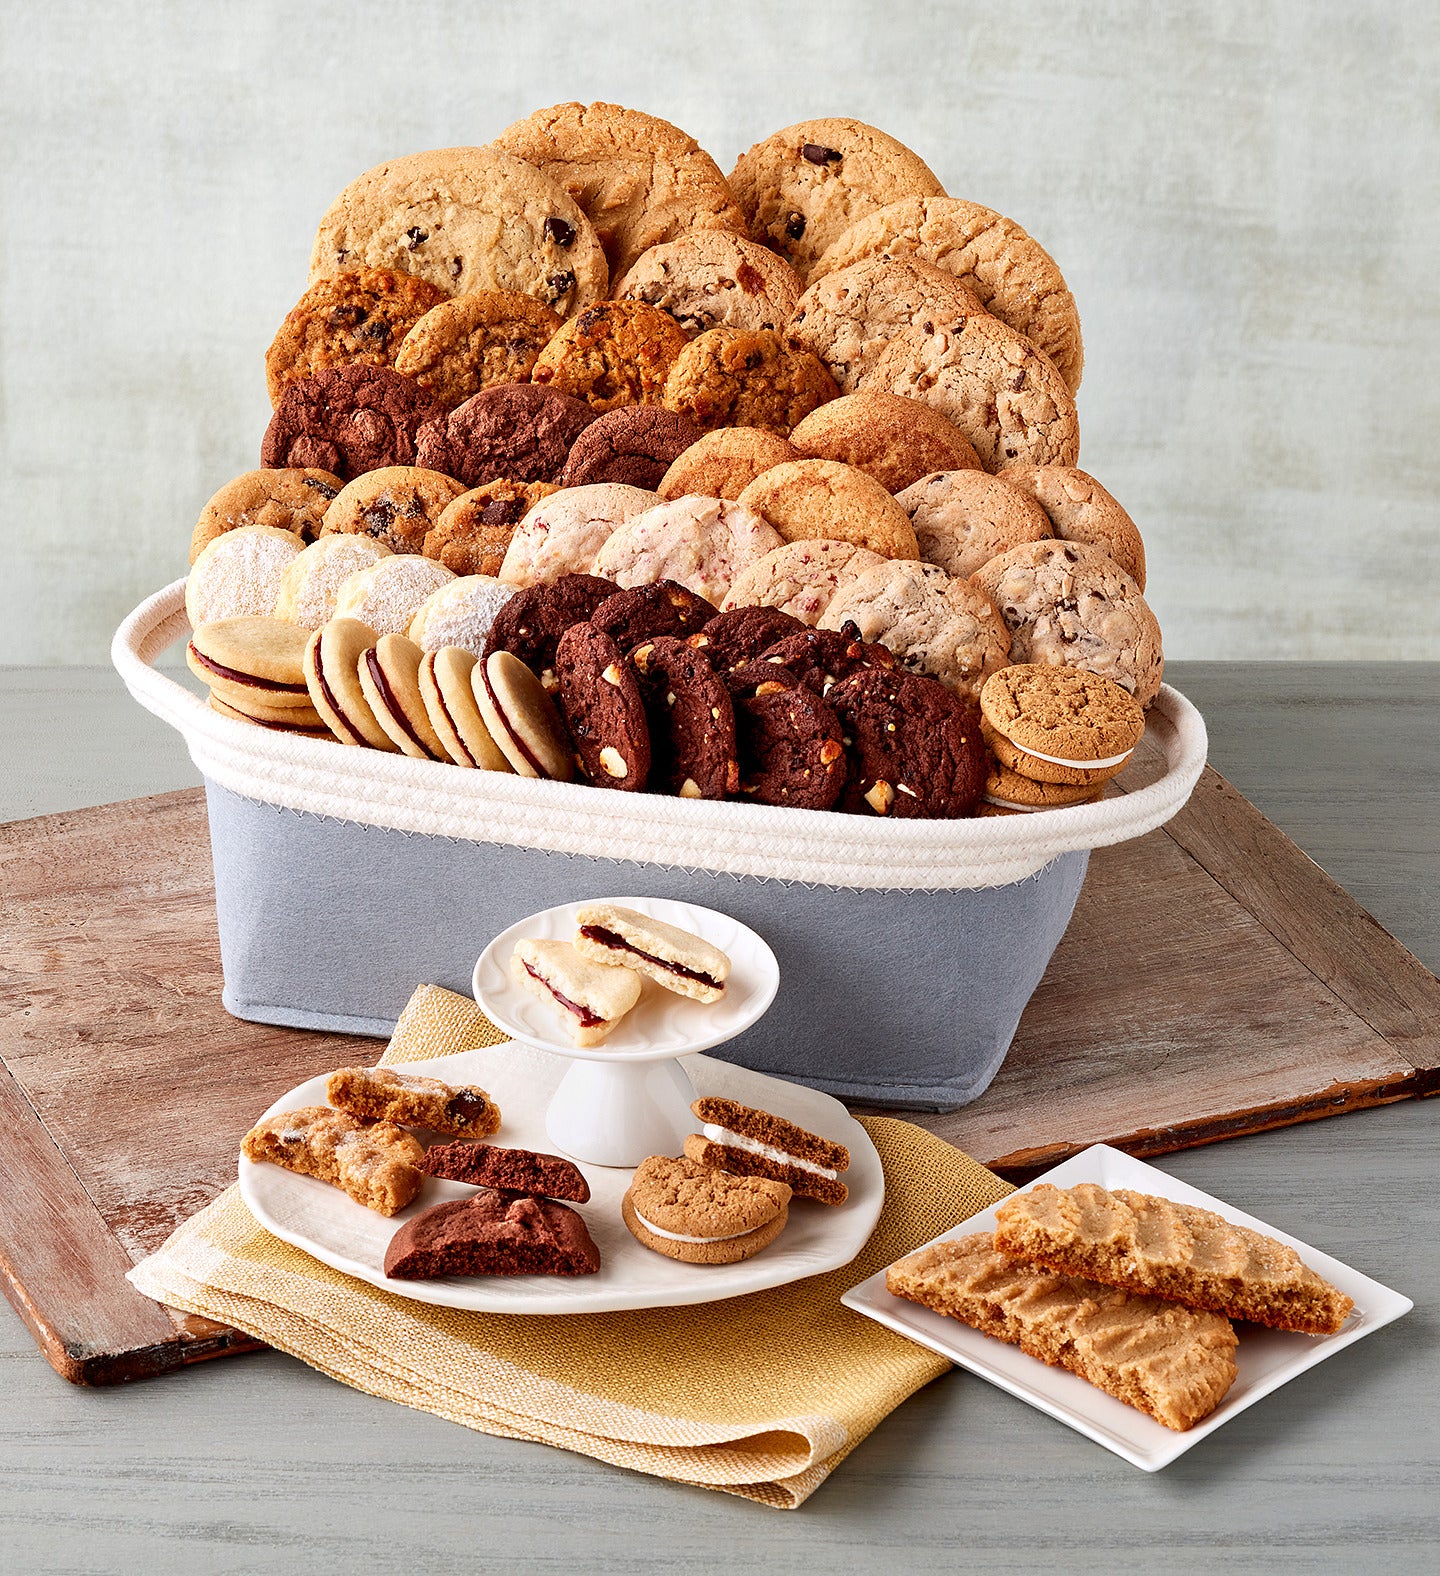 3 lb. Variety Cookie Tray